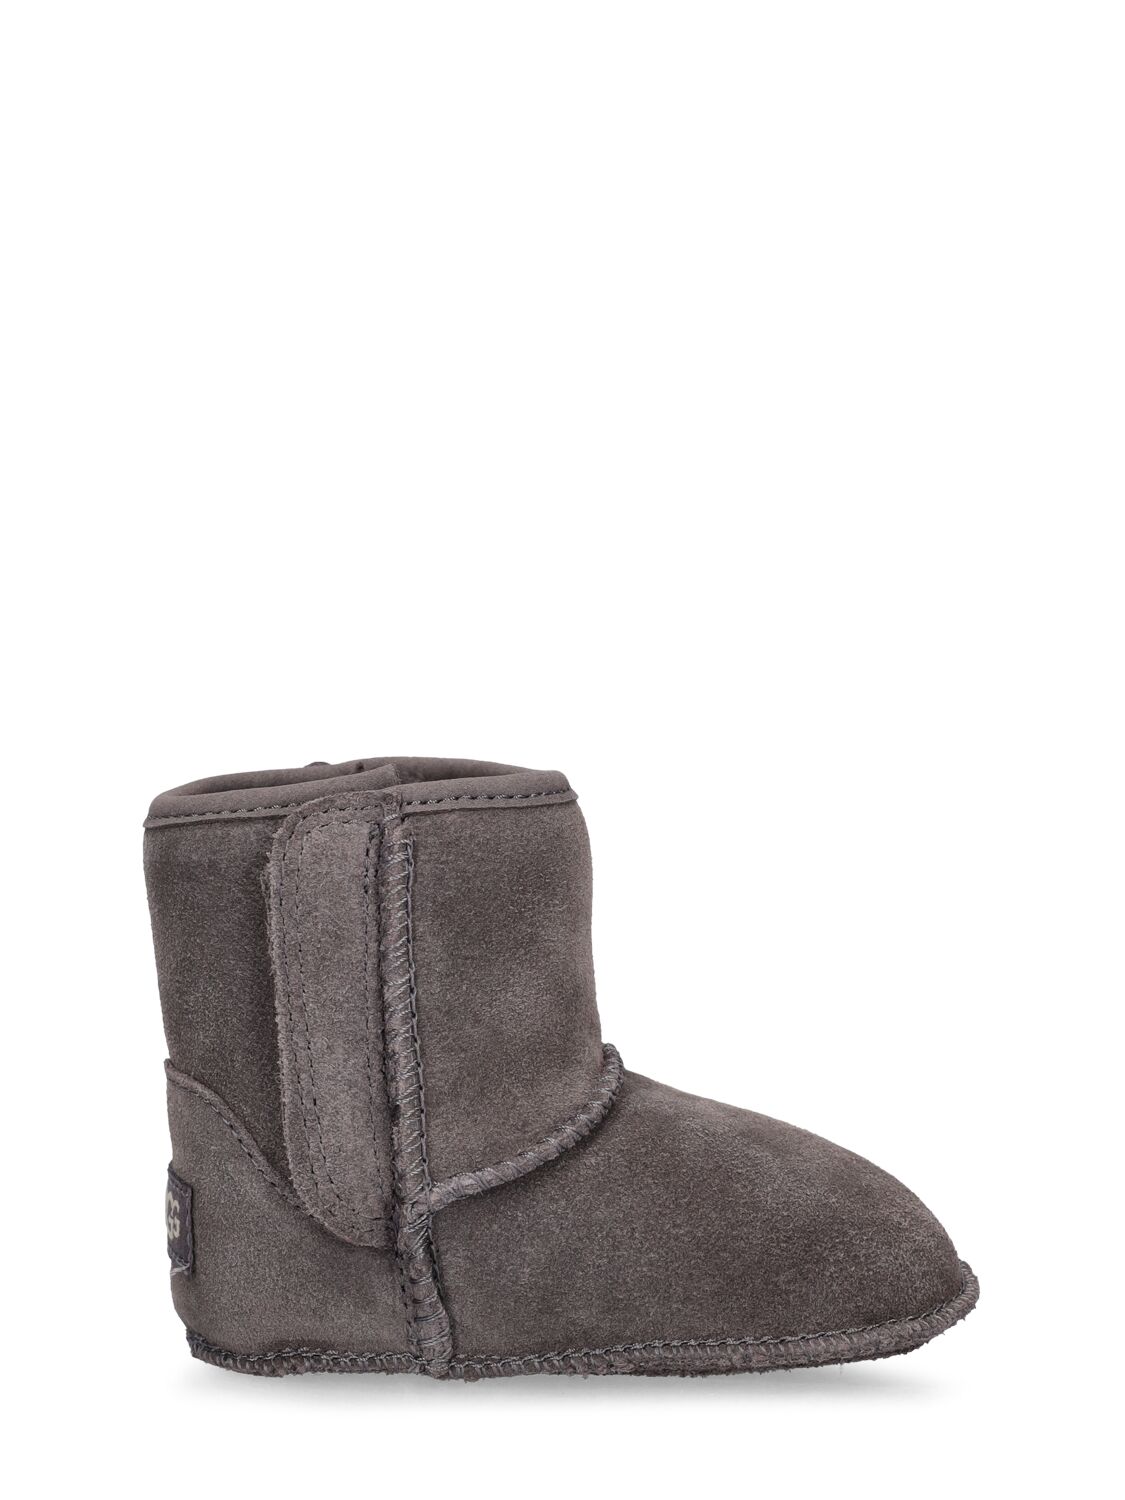 Baby Classic Shearling Boots